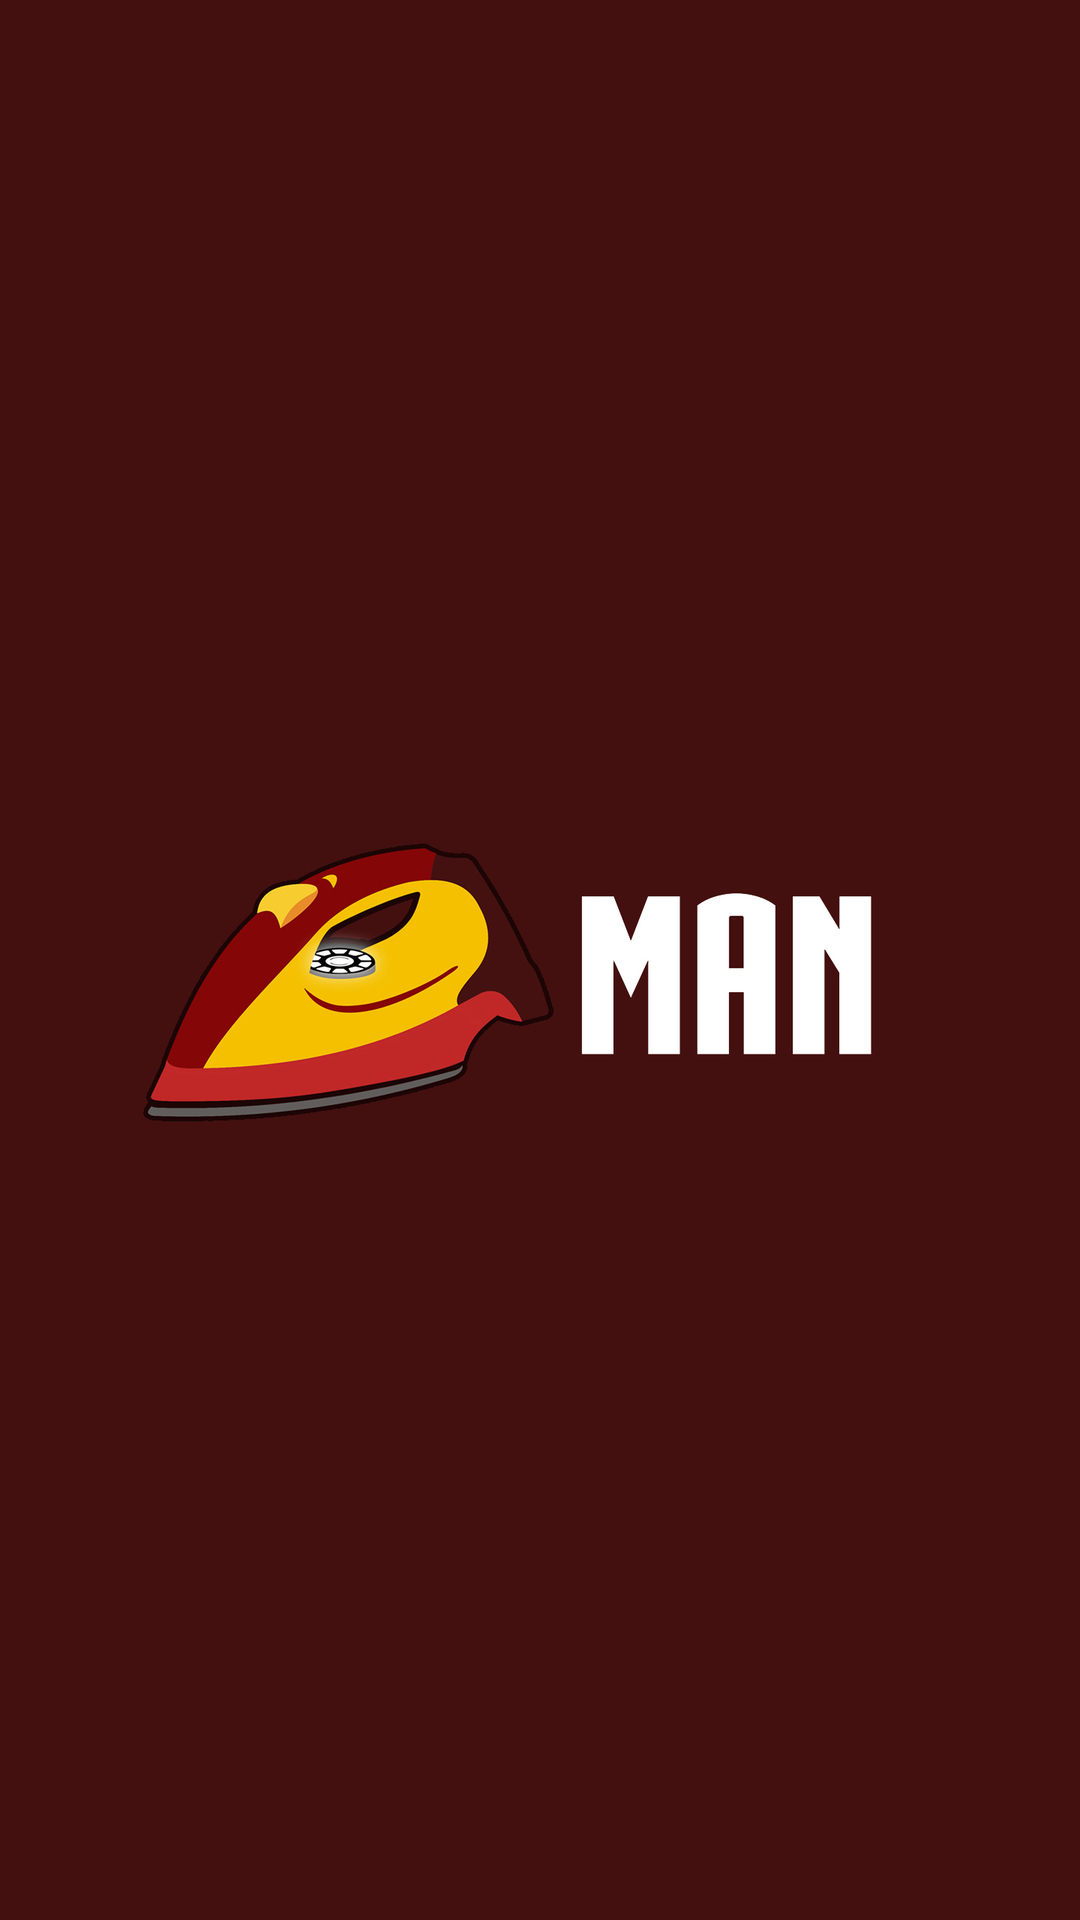 Iron Man Funny IPhone Wallpaper - IPhone Wallpapers : iPhone Wallpapers